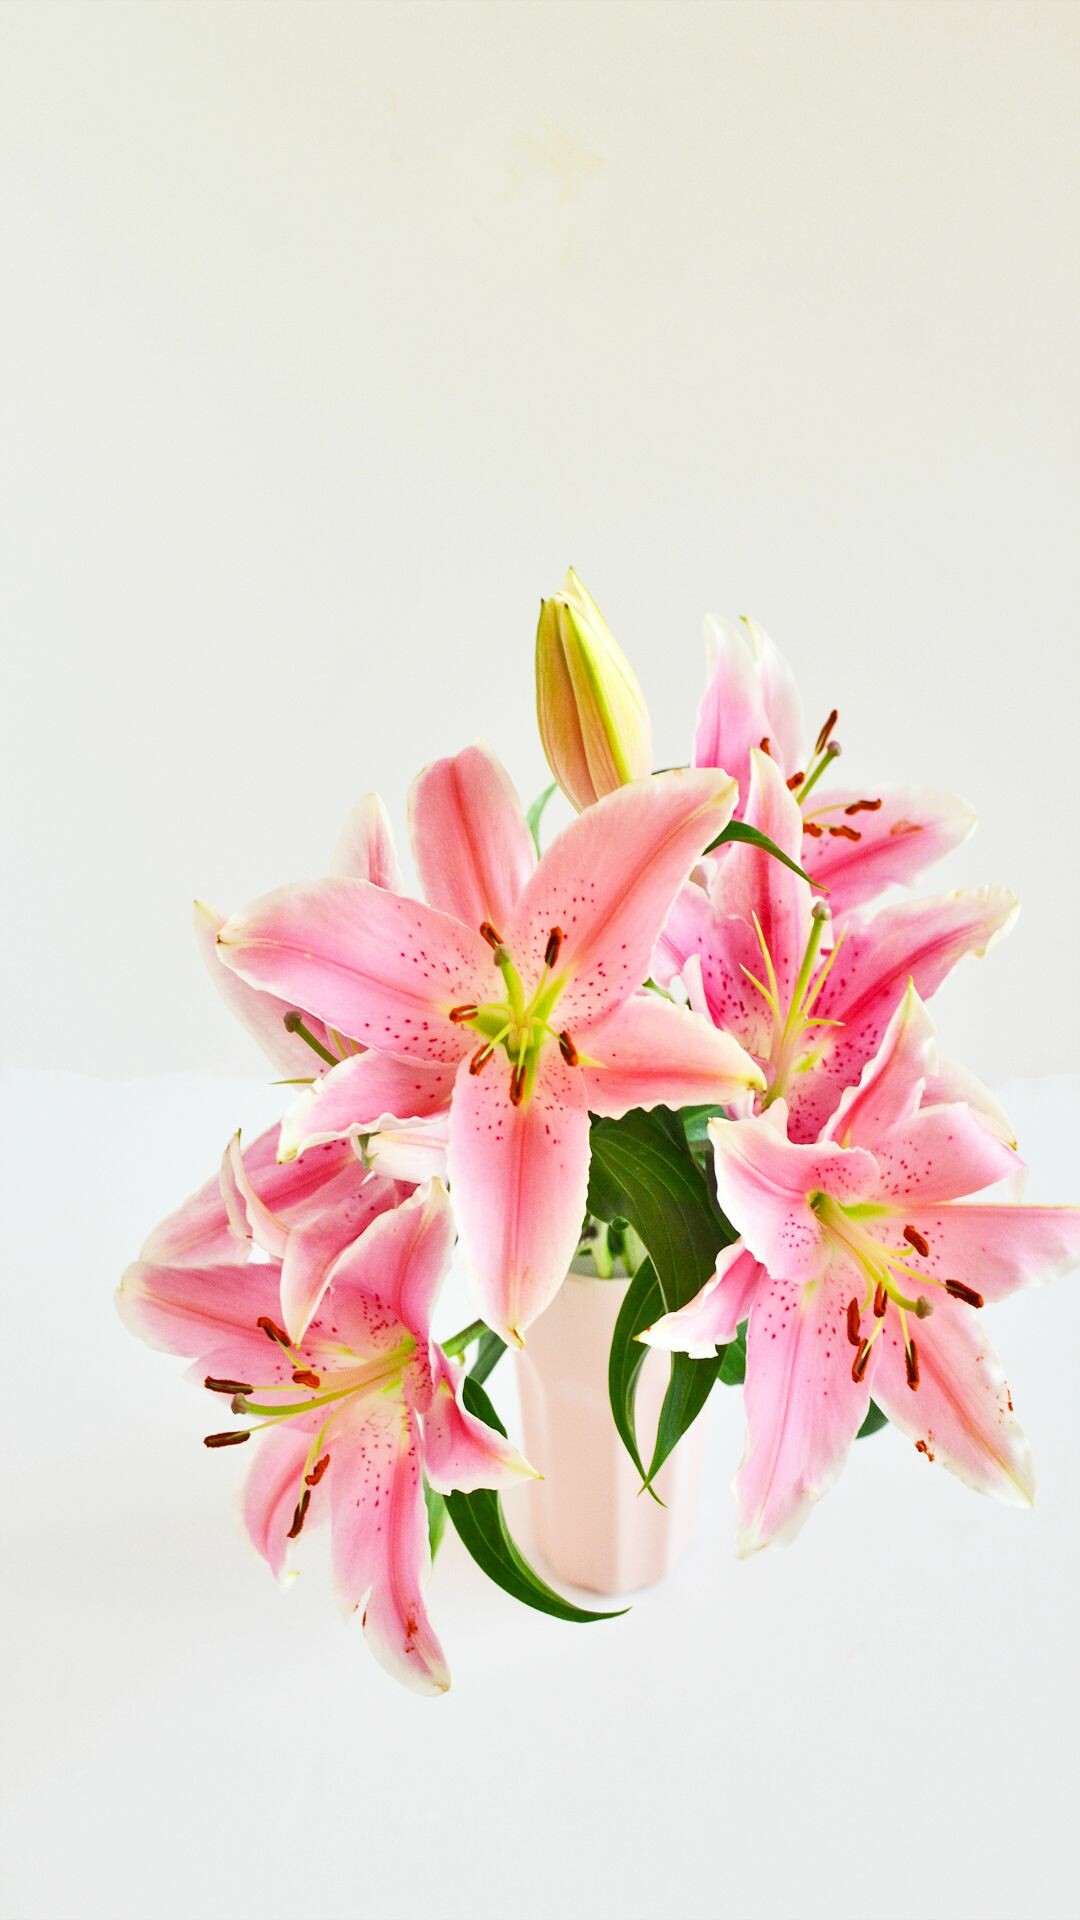 Lily iPhone wallpaper, Enthralling design, Pretty background, Lovely wallpaper, 1080x1920 Full HD Phone